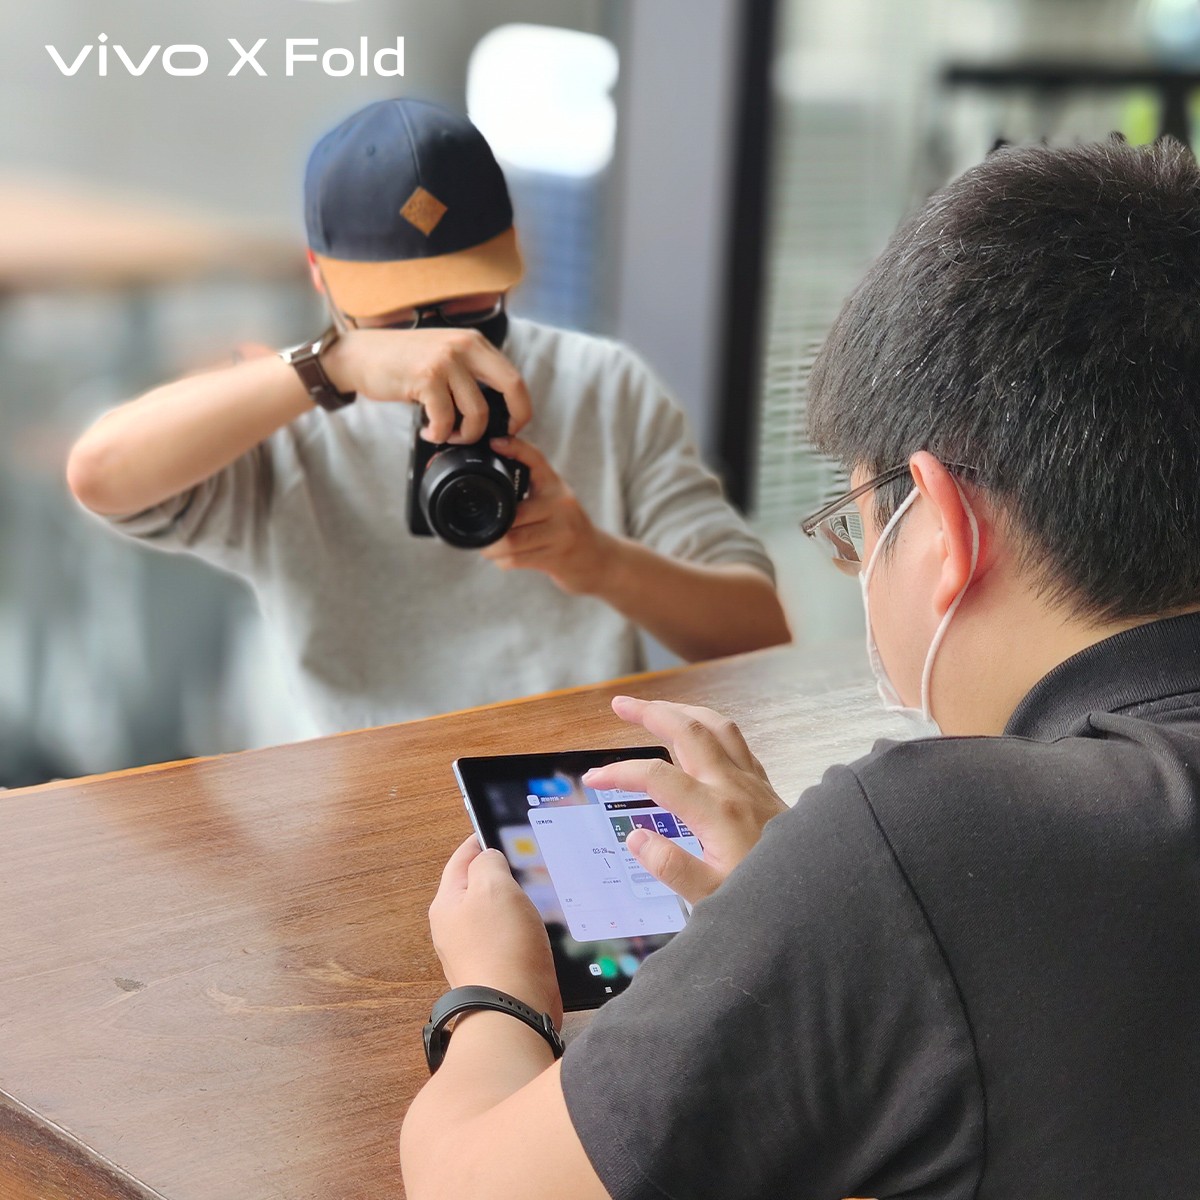 vivo Malaysia Brings the ‘Joy of Humanity’ with its First Foldable Phone – vivo X Fold